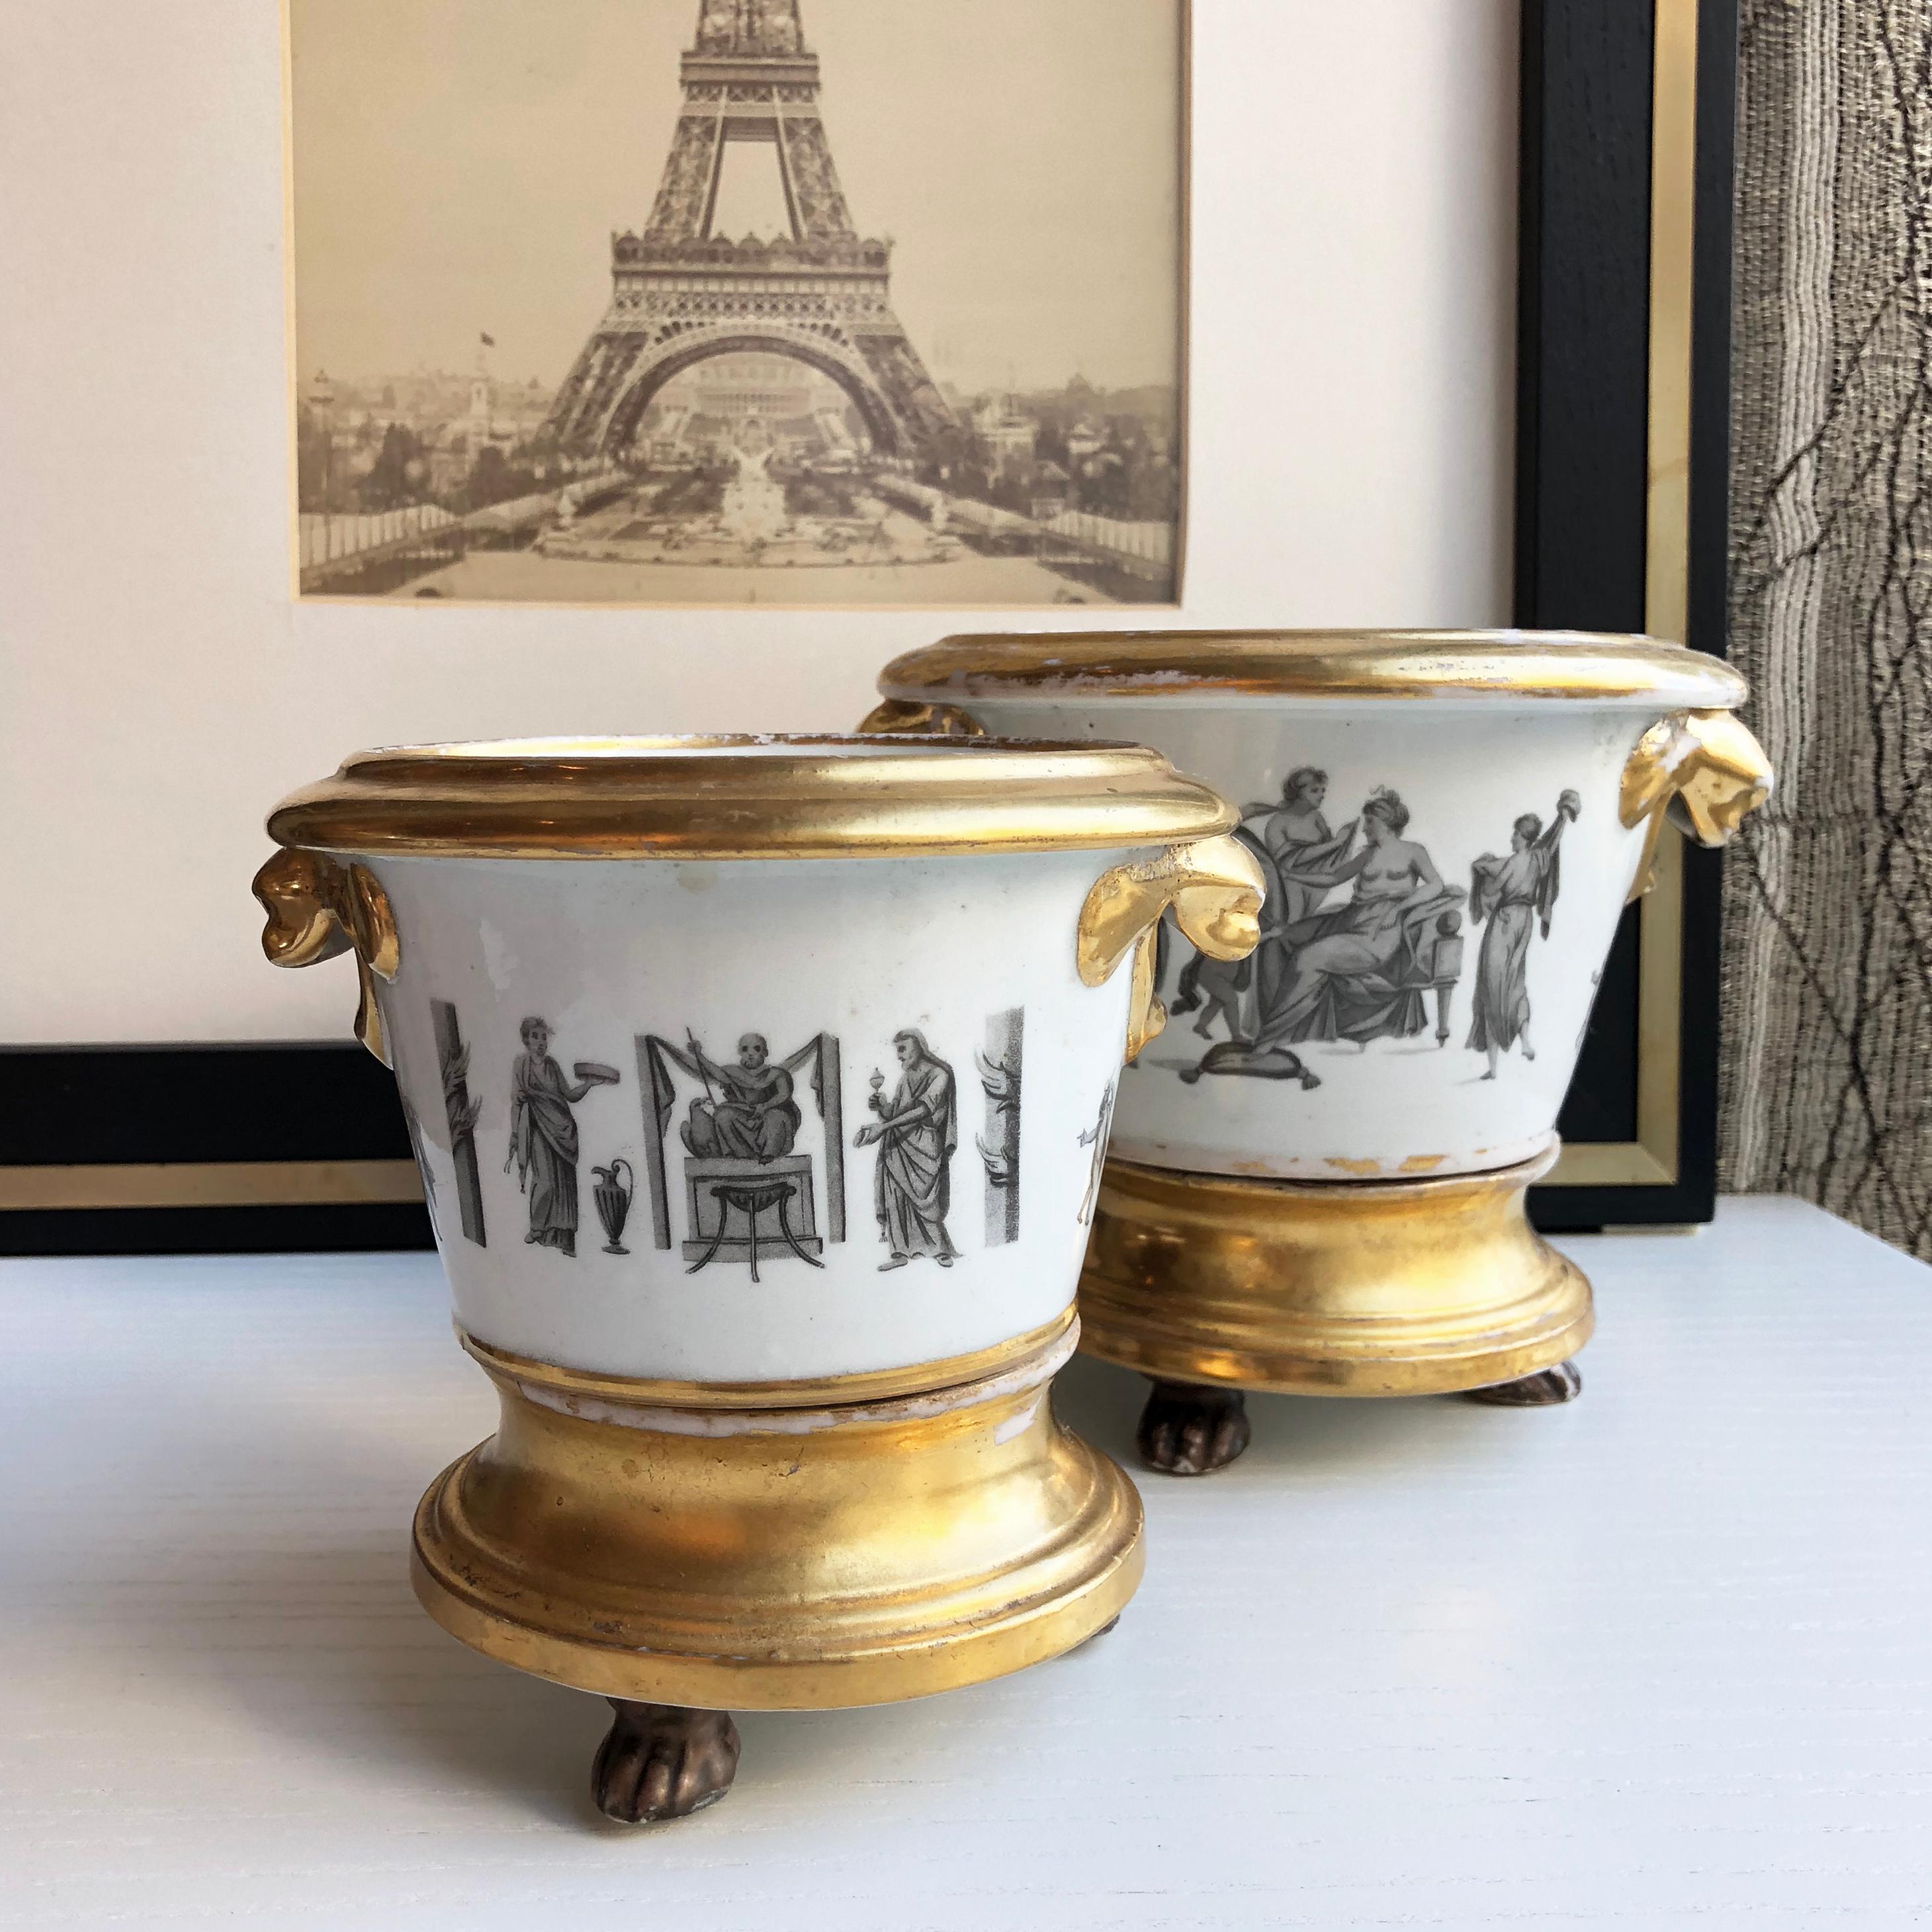 Set of two French planter pots from early 1800’s. Featuring intricate imagery of gods and goddesses, with gold trim. Sold as a set of two.

1 x D18 x H15.5 cm
1 x D14.5 x 13.5 cm

Good antique condition considering the age